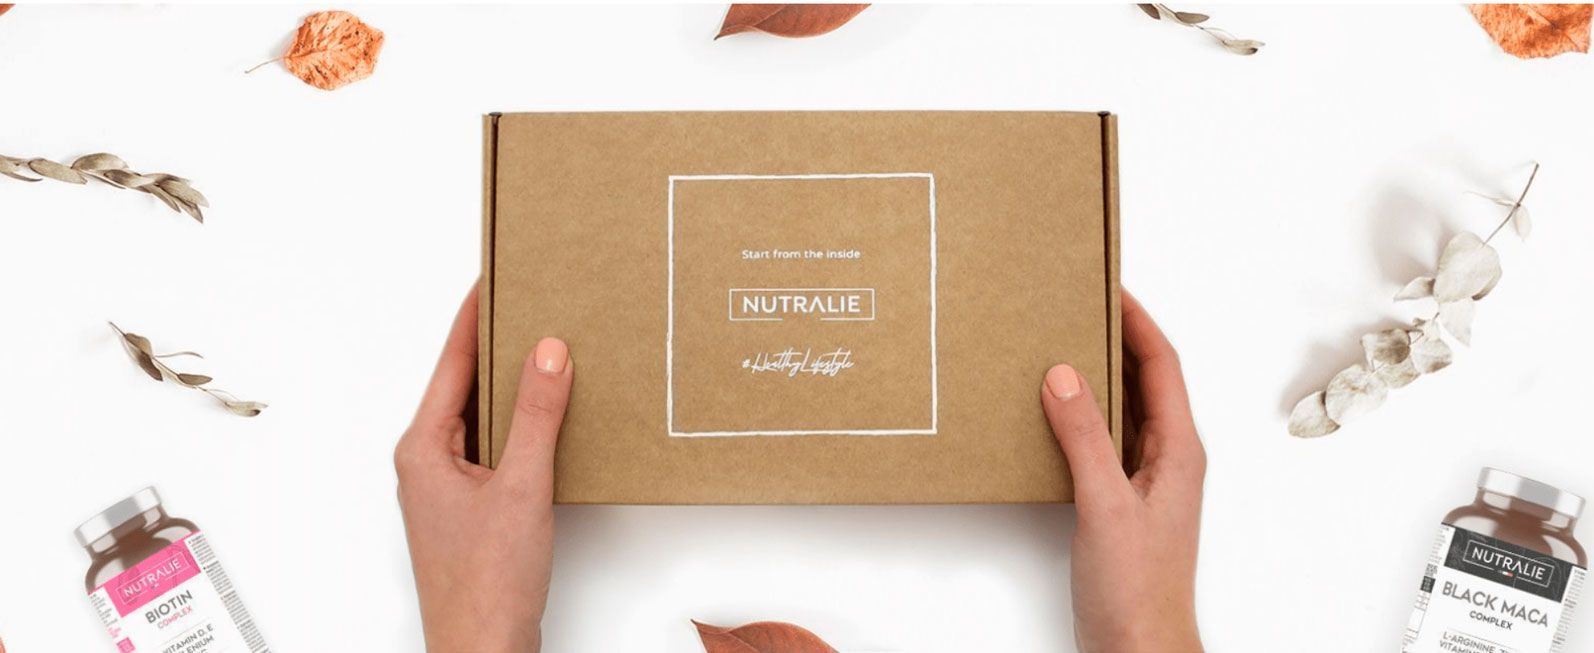 Nutralie trusts Lifting Group and Imagine Creative Ideas for the restyling of the brand.